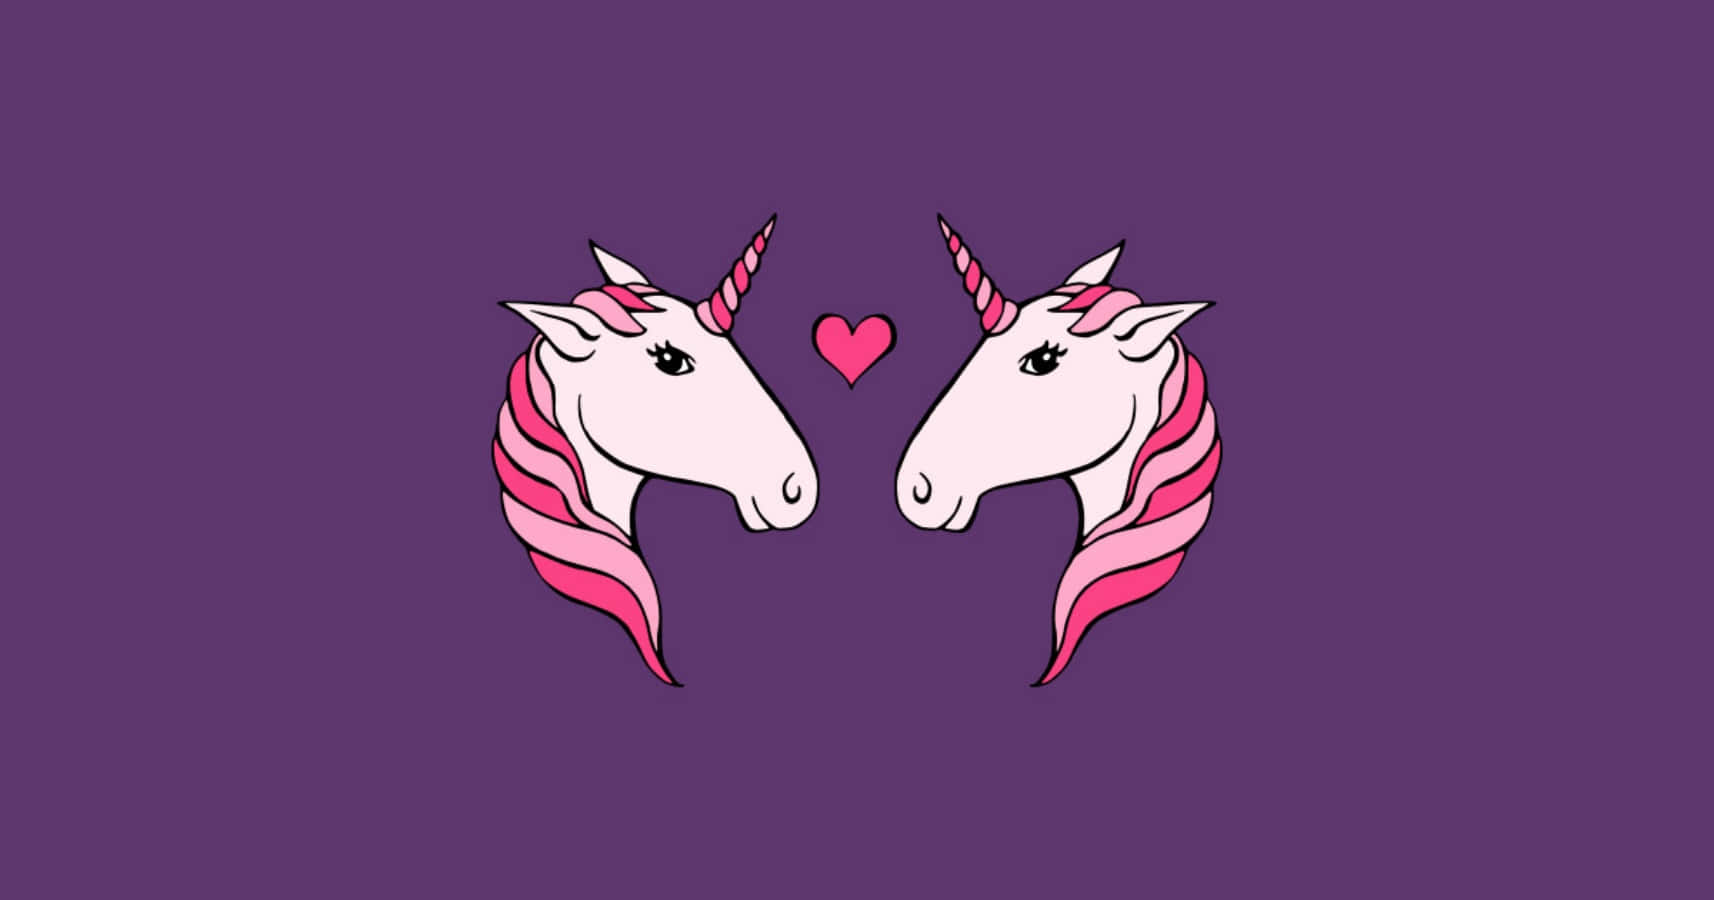 Two Unicorns With Hearts On A Purple Background